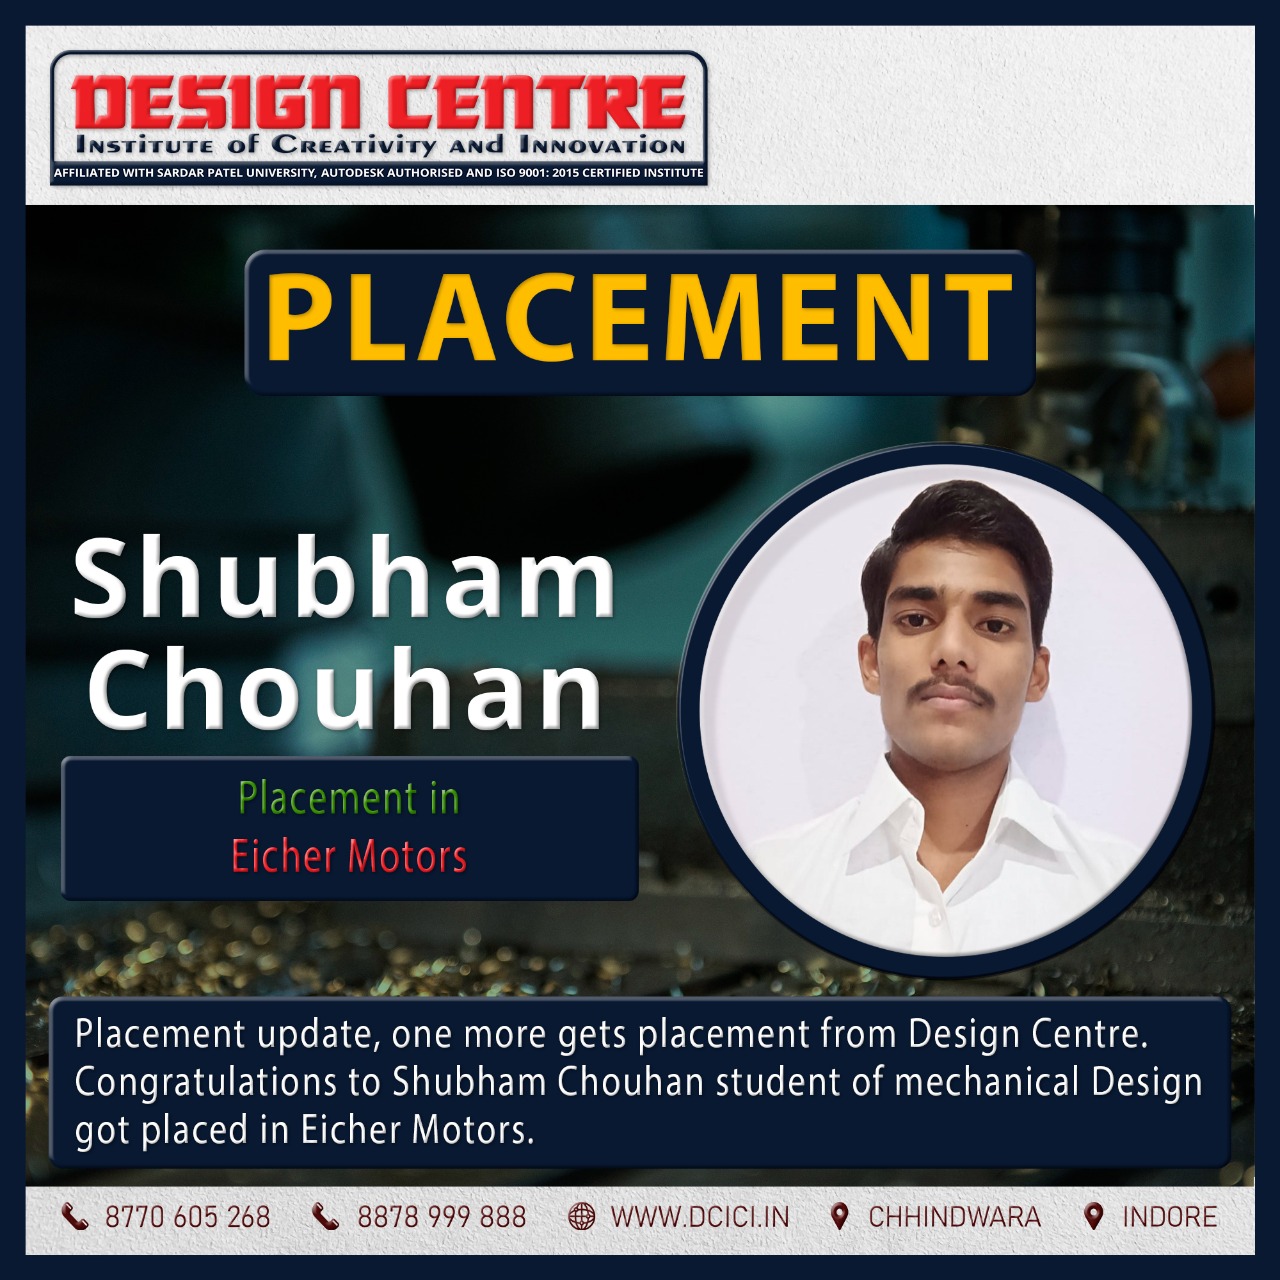 Shubham Chouhan Student of Mechanical Design at Design Centre got placed in Eicher Motors